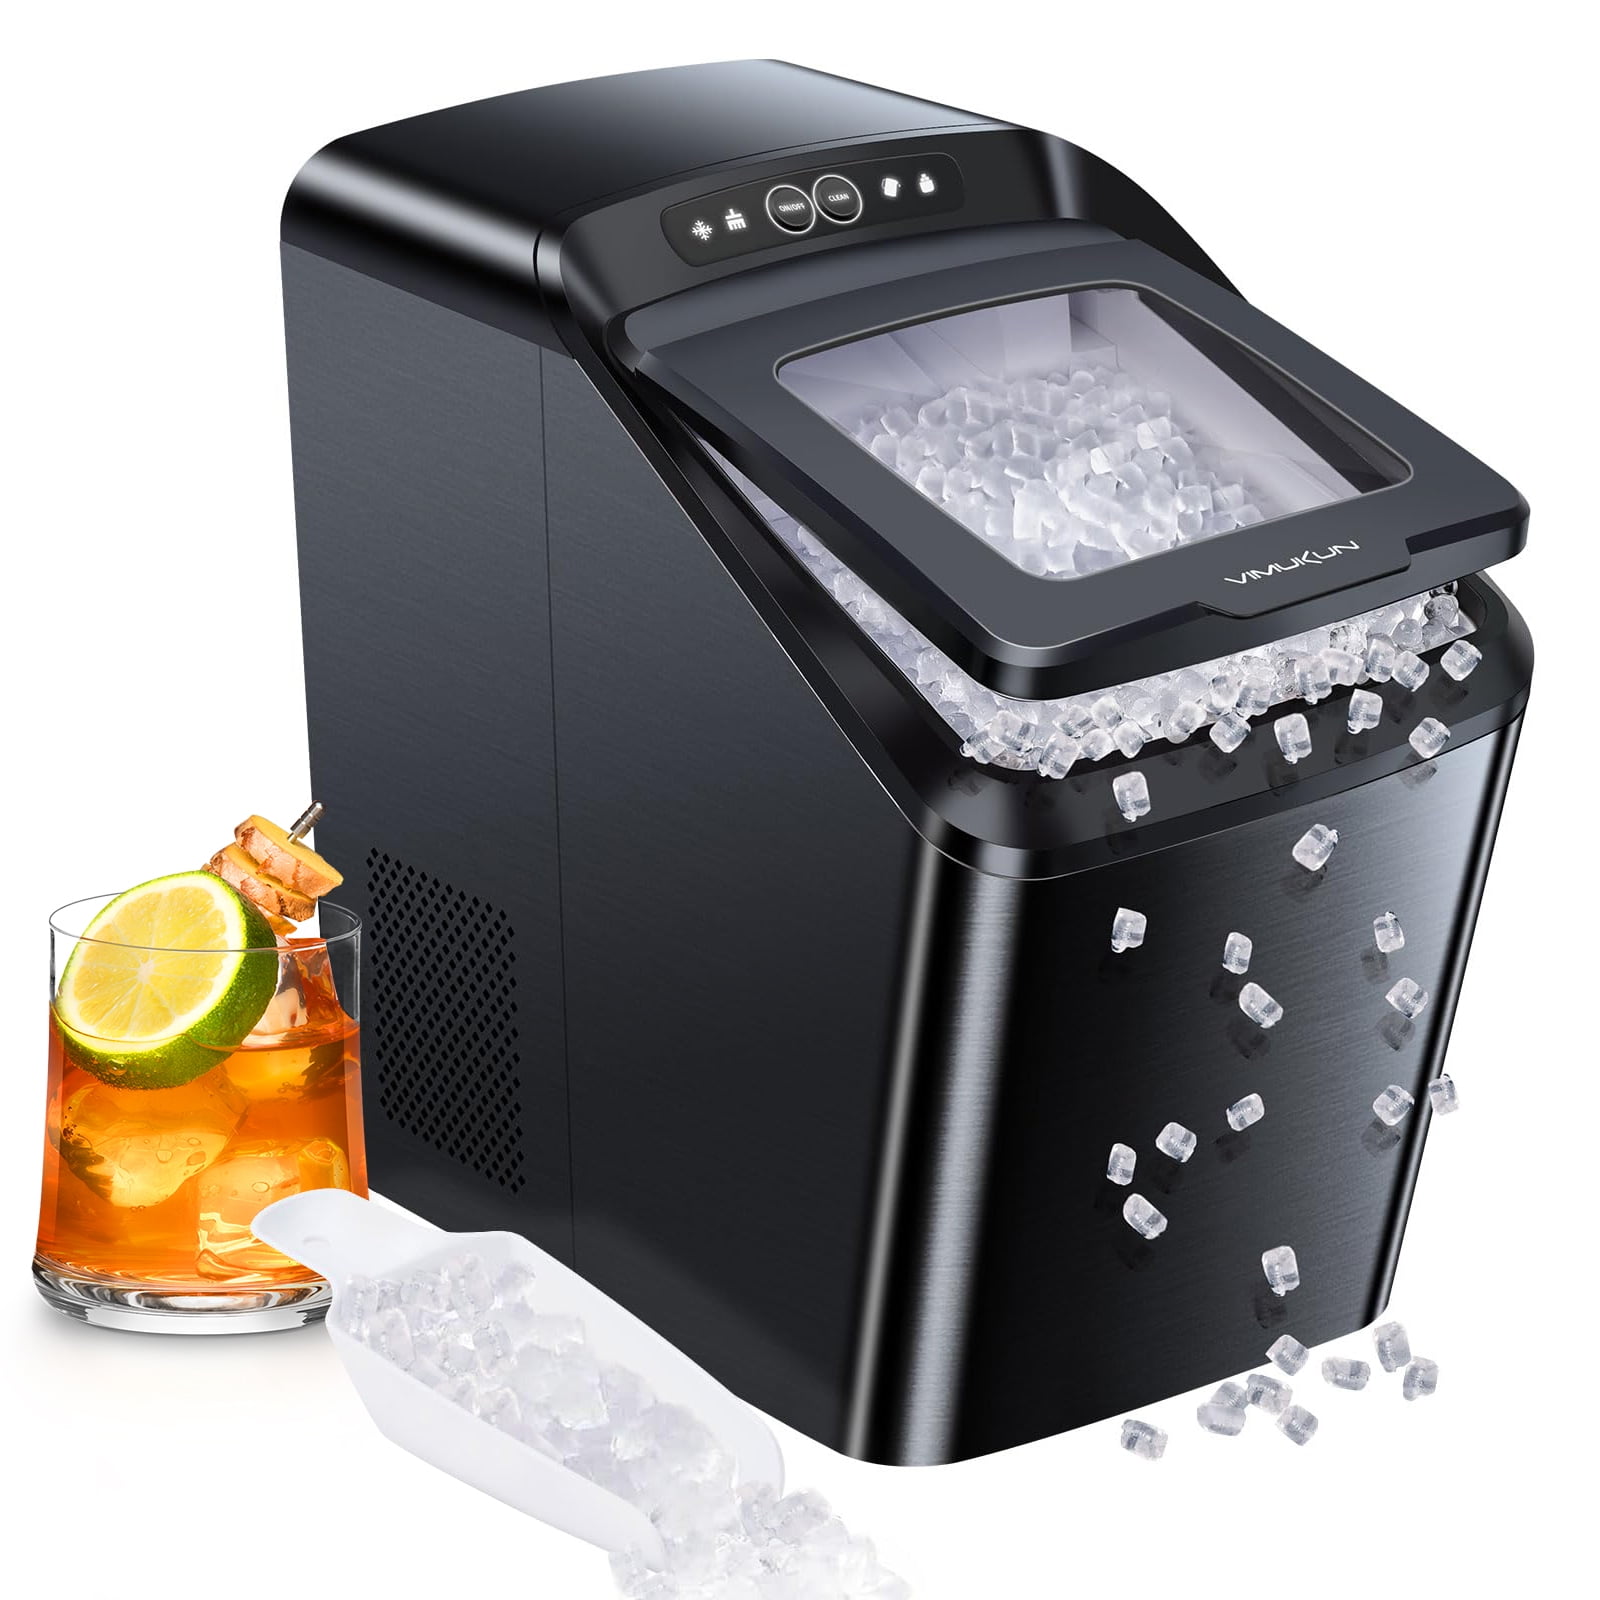 Portable Ice Makers for sale in Tulsa, Oklahoma